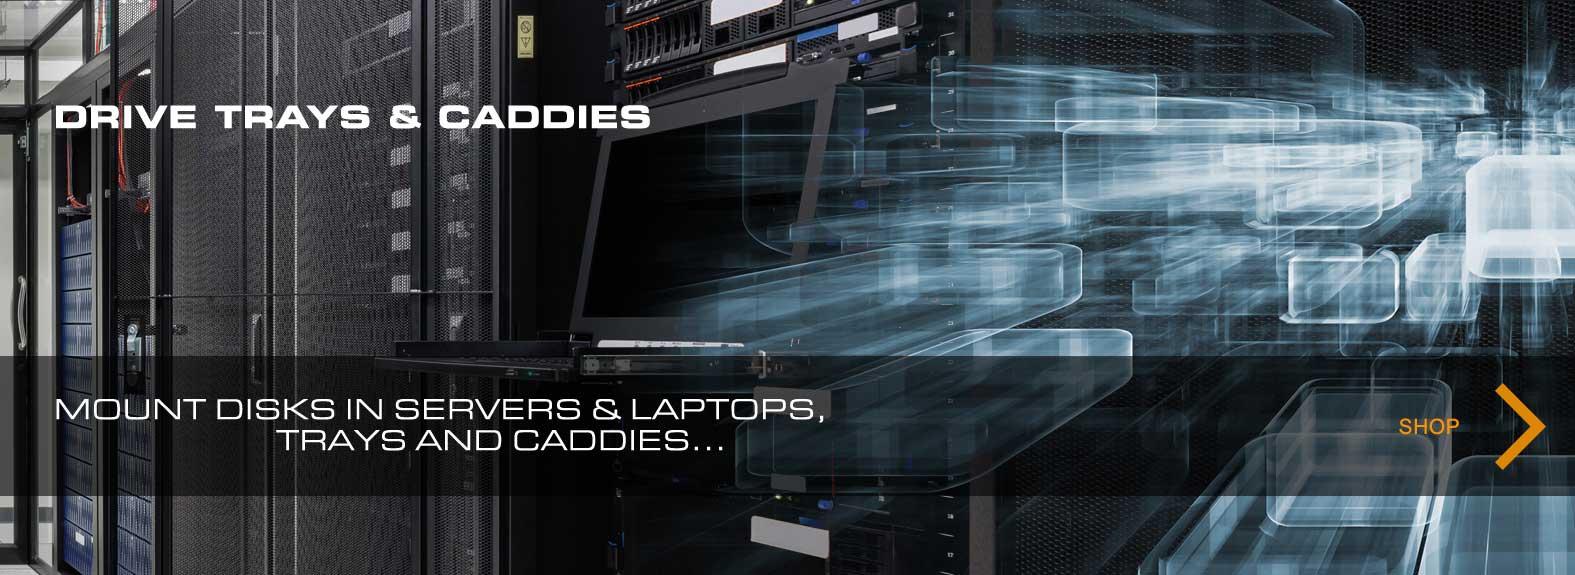 Drives for servers & laptops, trays and caddies